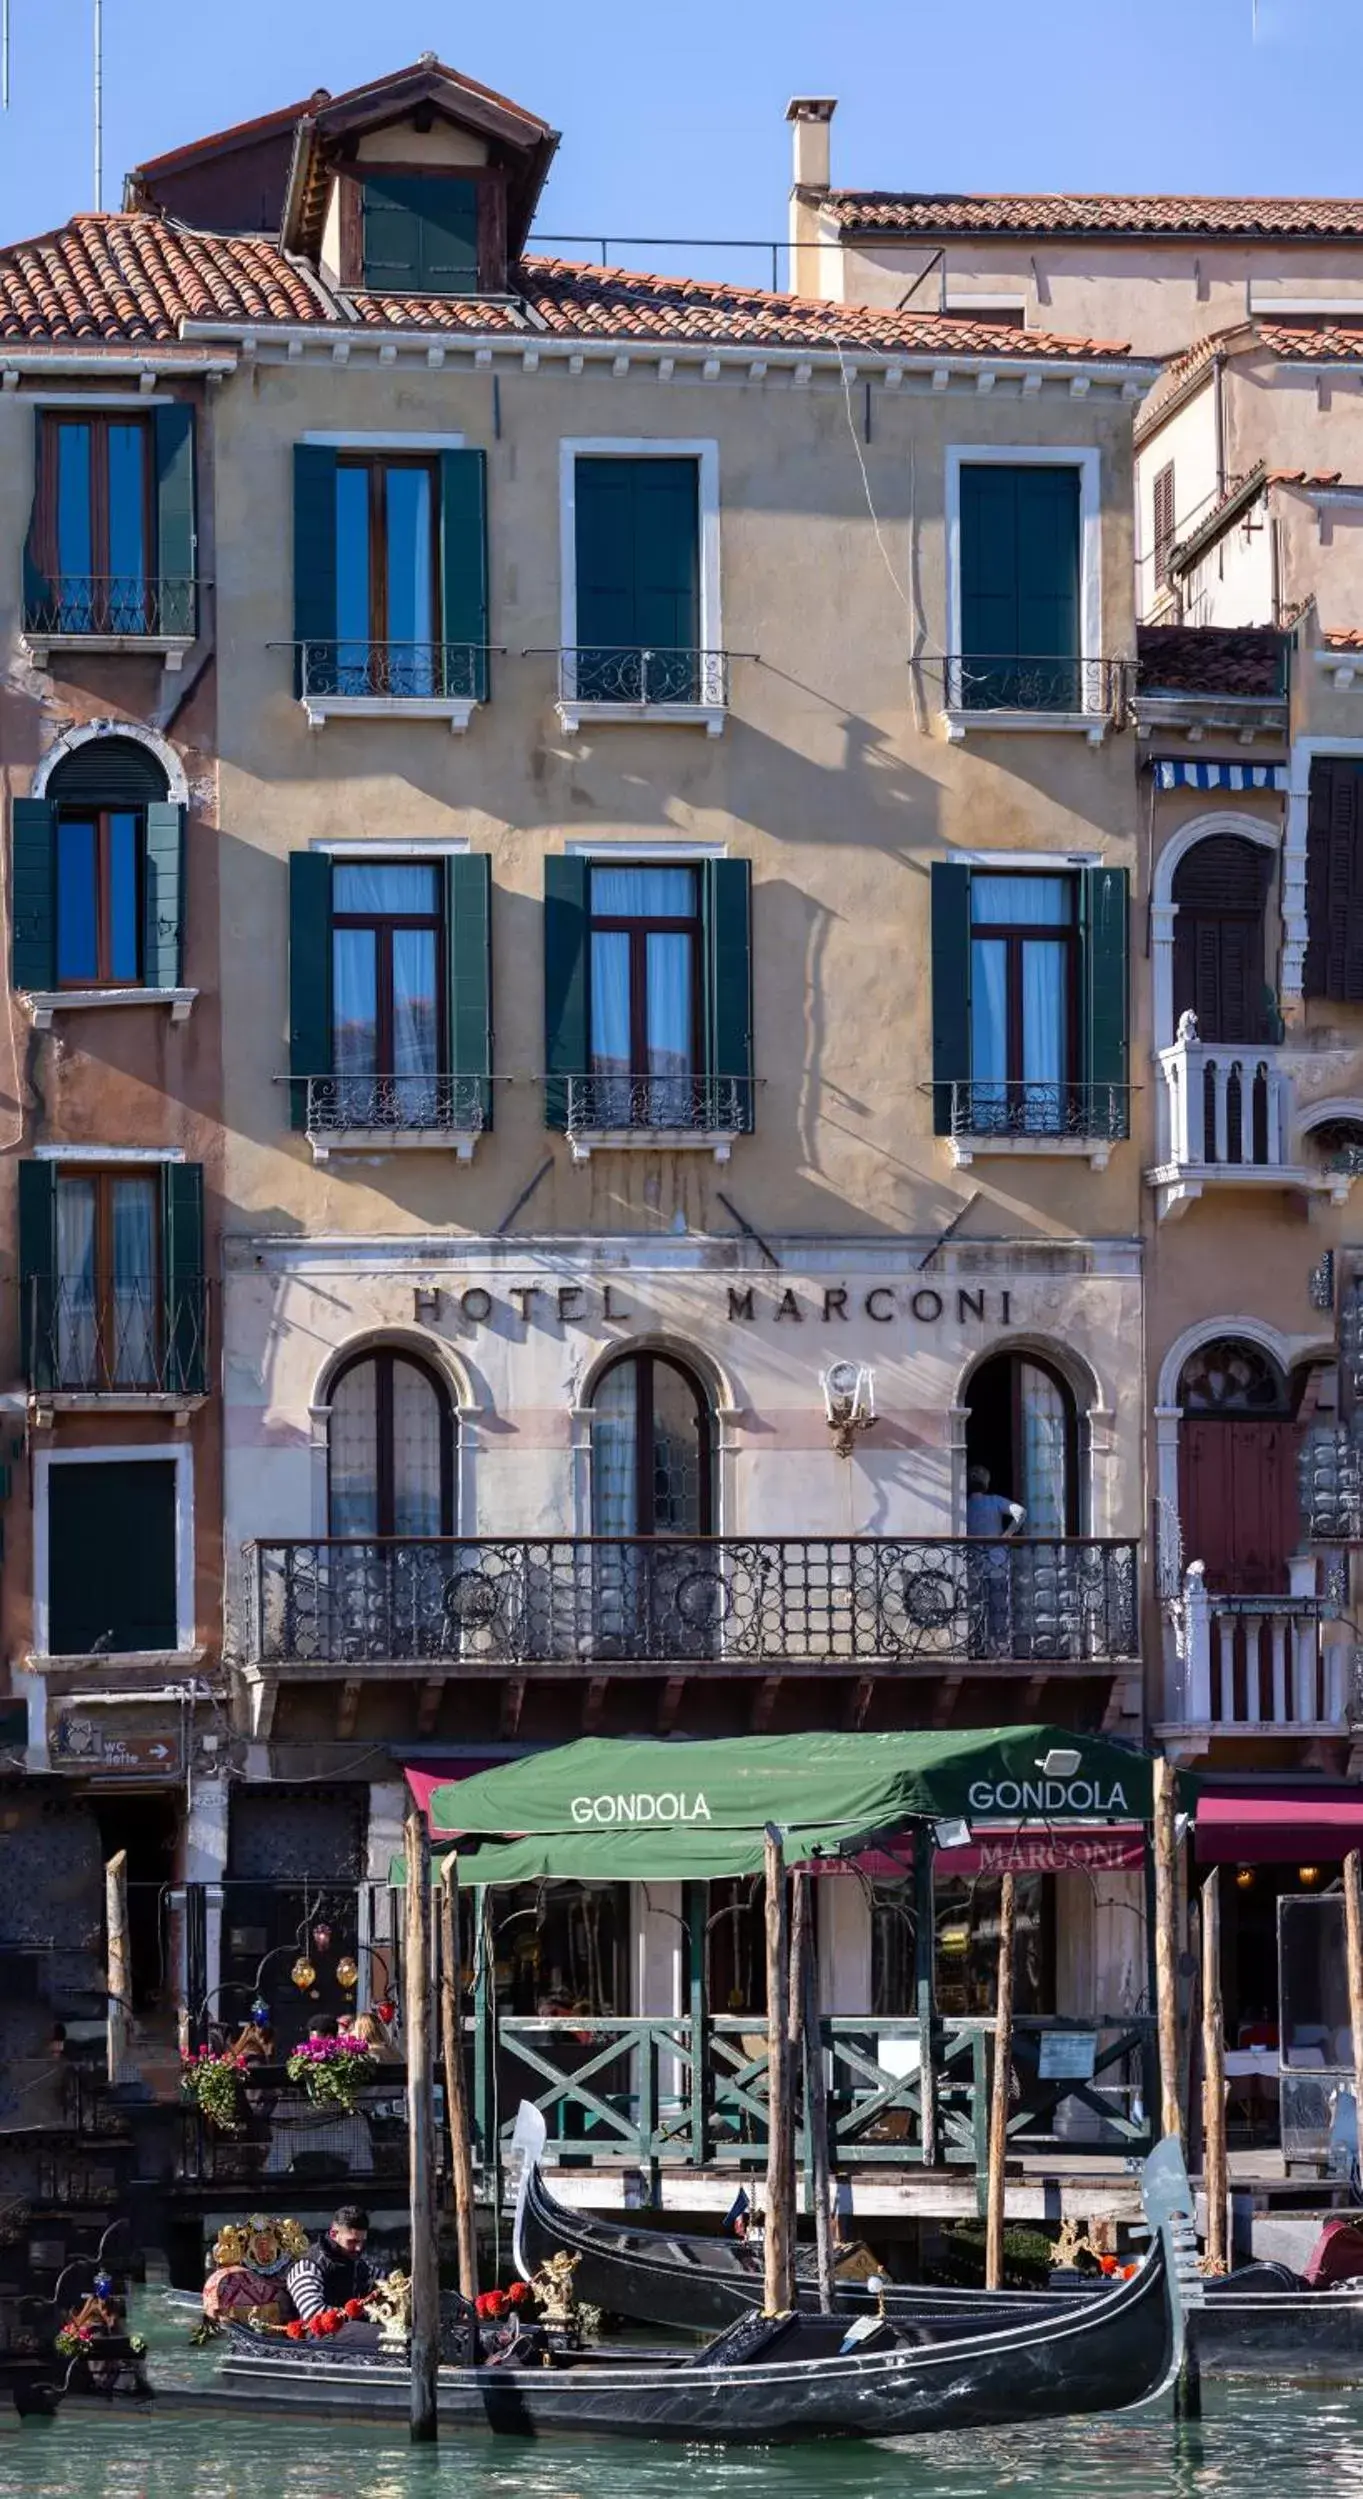 Property Building in Hotel Marconi